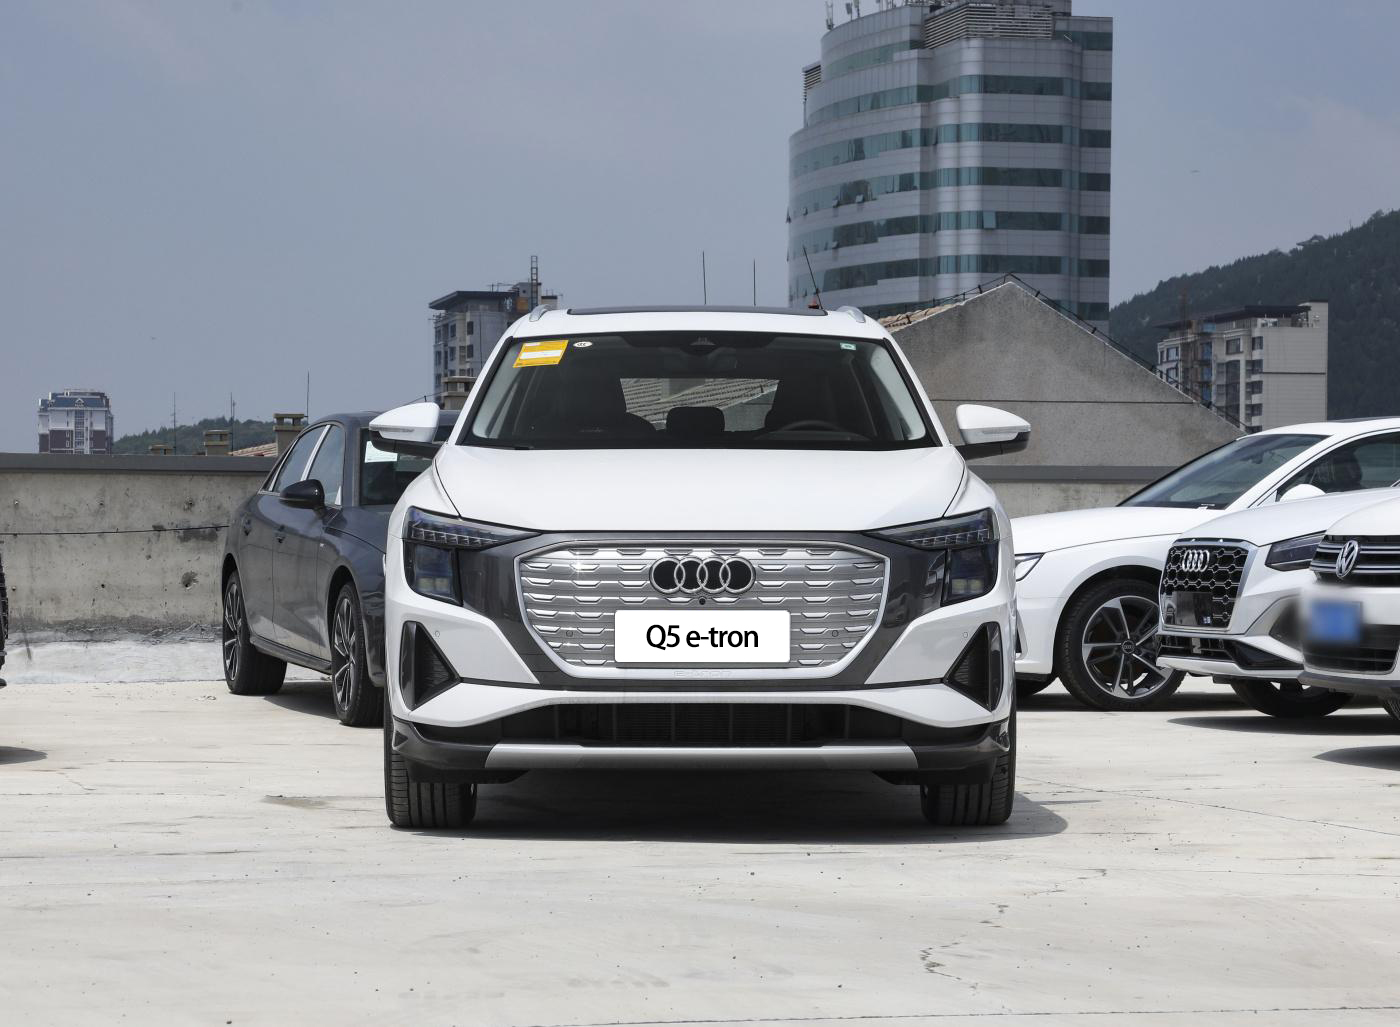 2024 Audi Q5 E-Tron Large Electric SUV Support Export Trade in China - Audi - 1